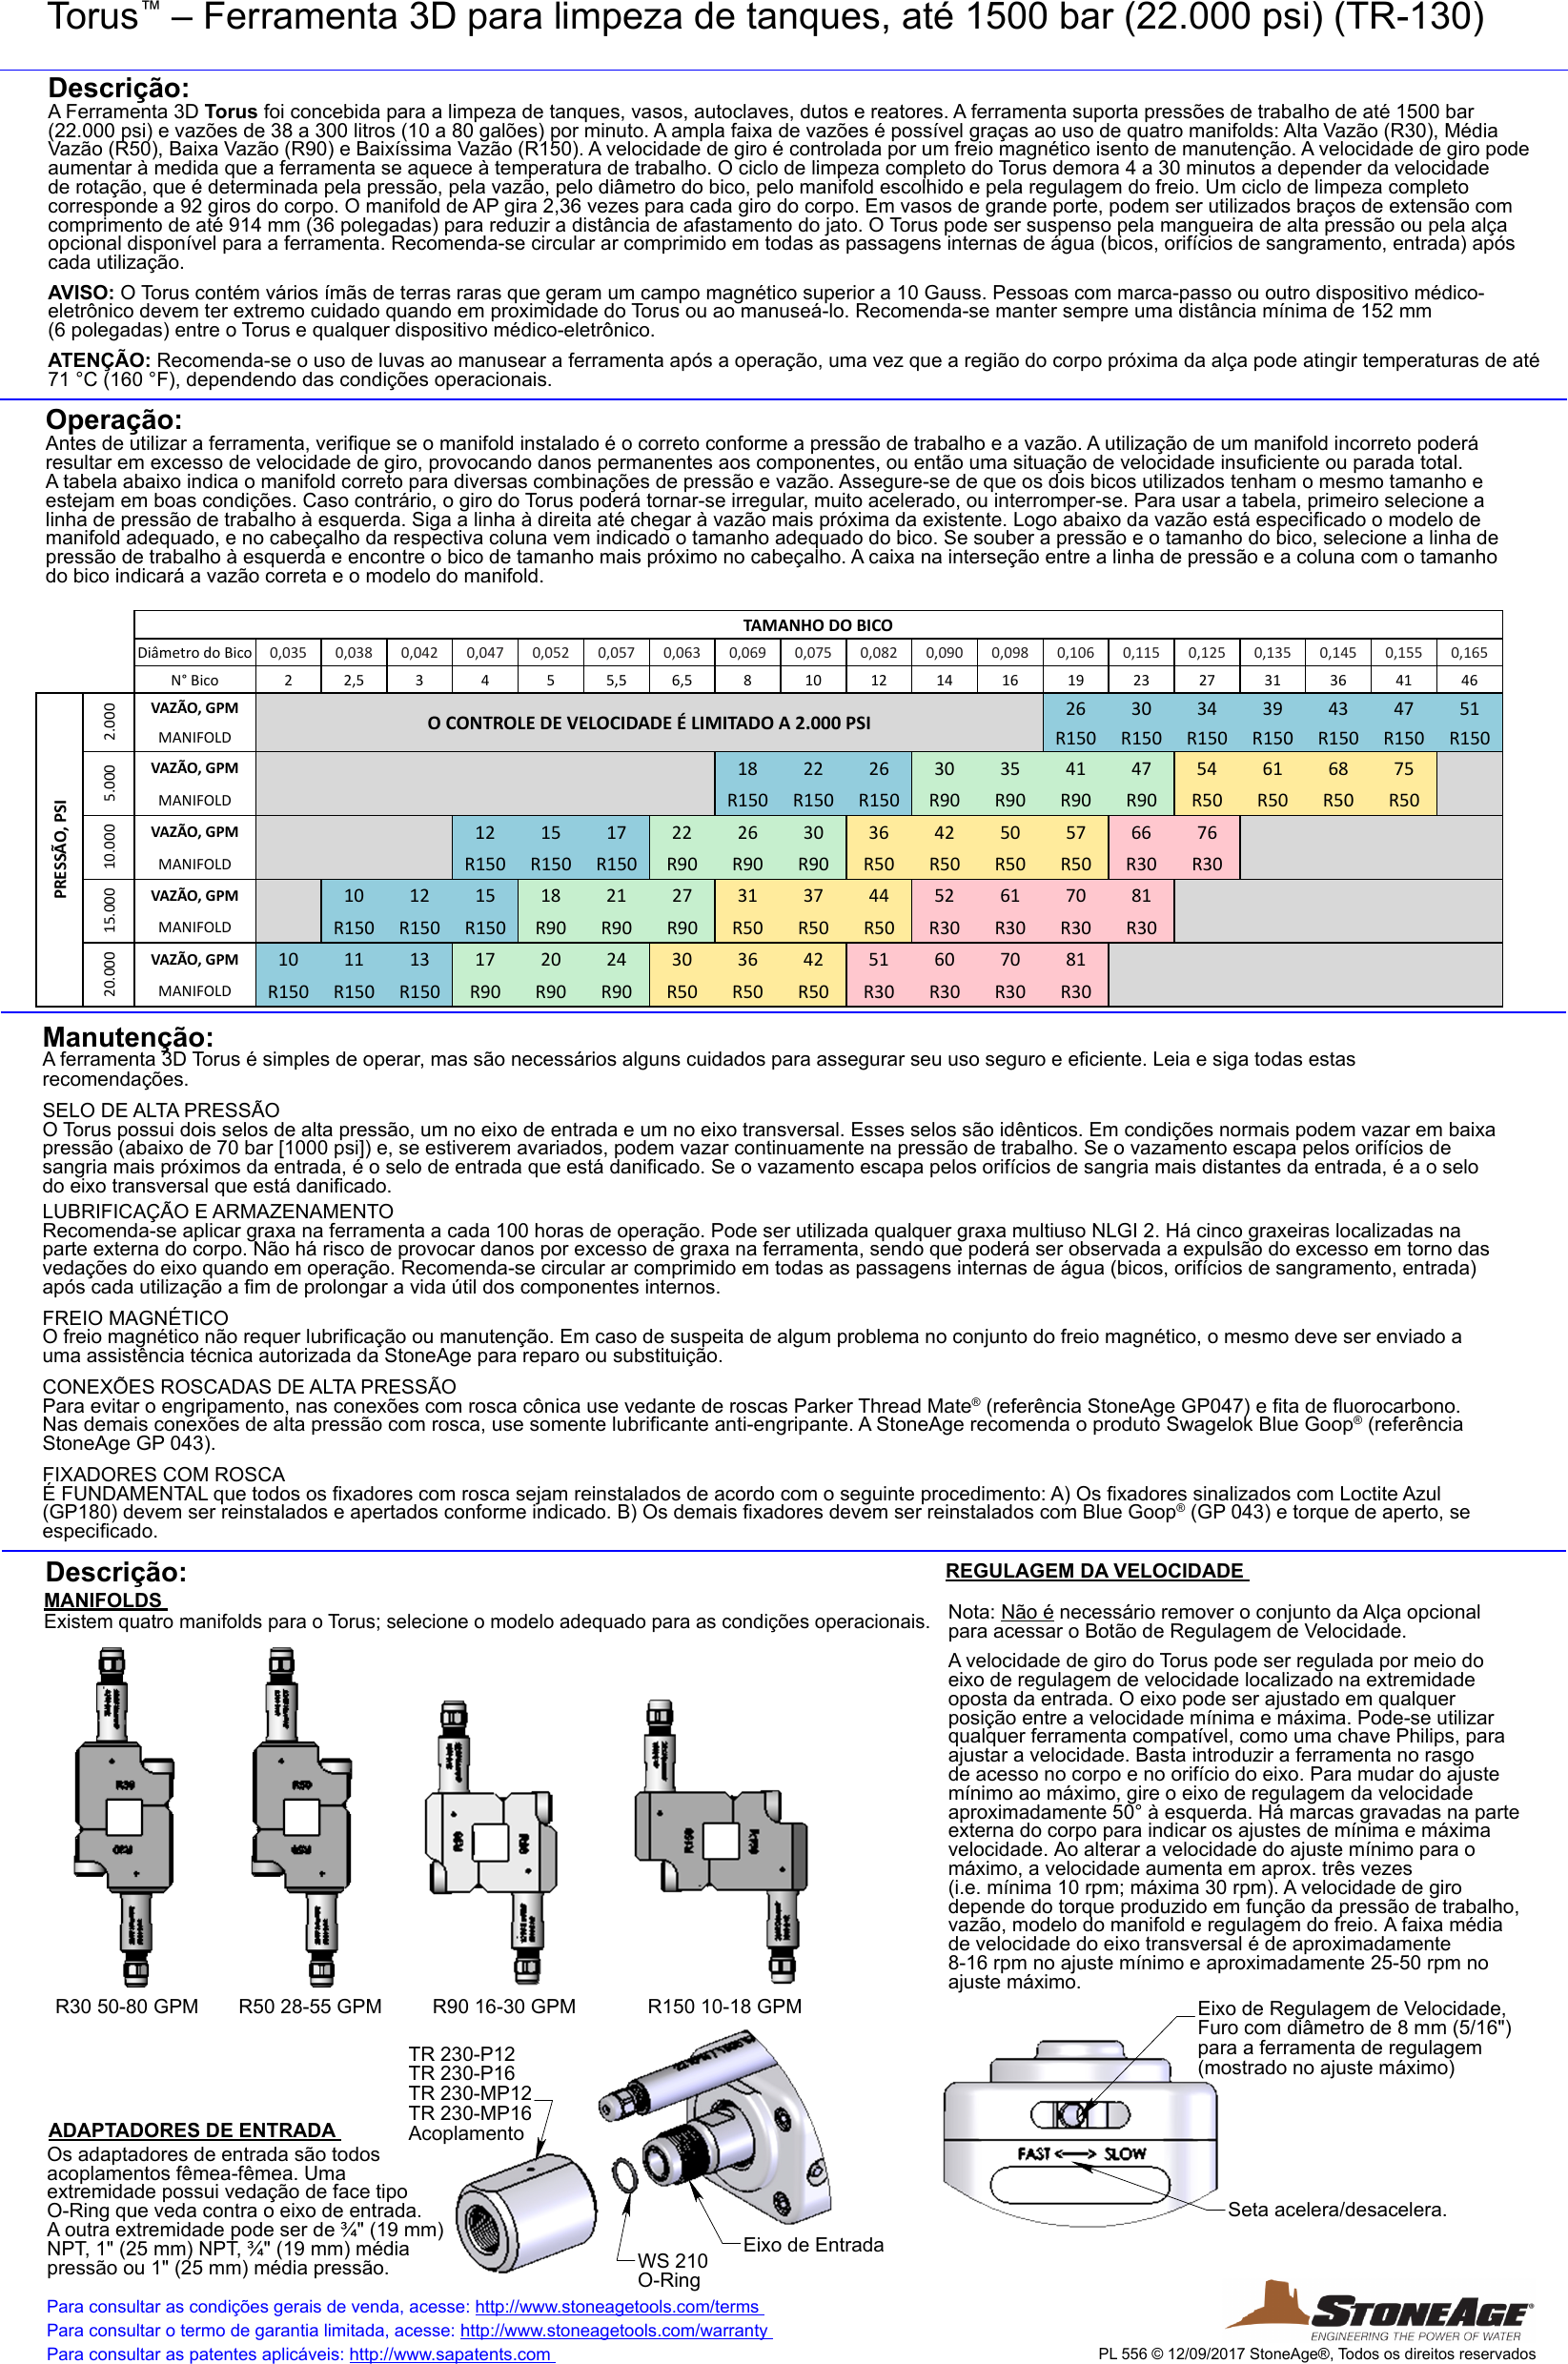 Page 1 of 4 - TR130 Tool Insert  TR-130 Manual PT